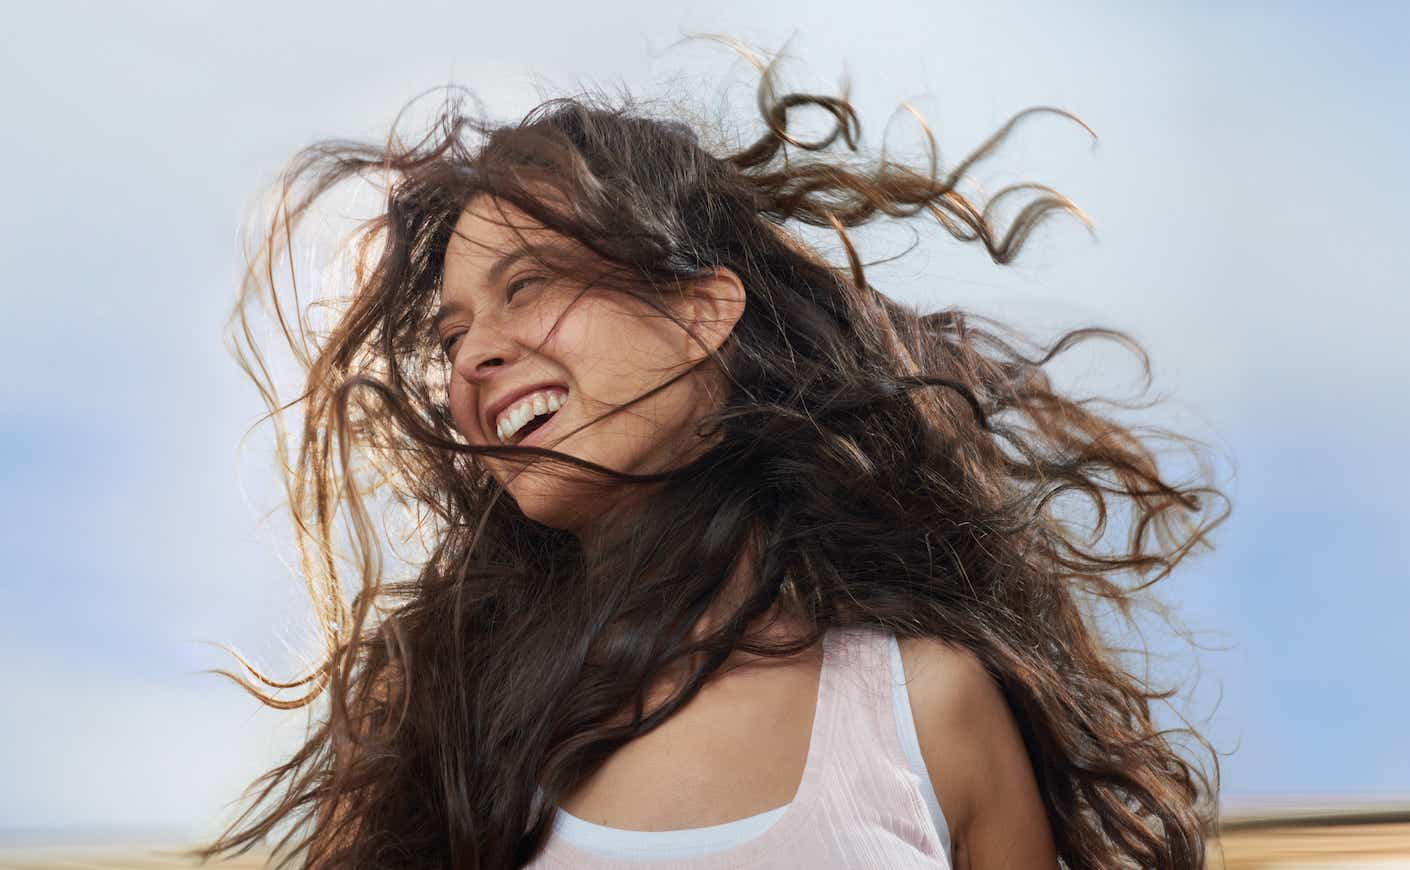 Girl enjoying wind in her hair while moving